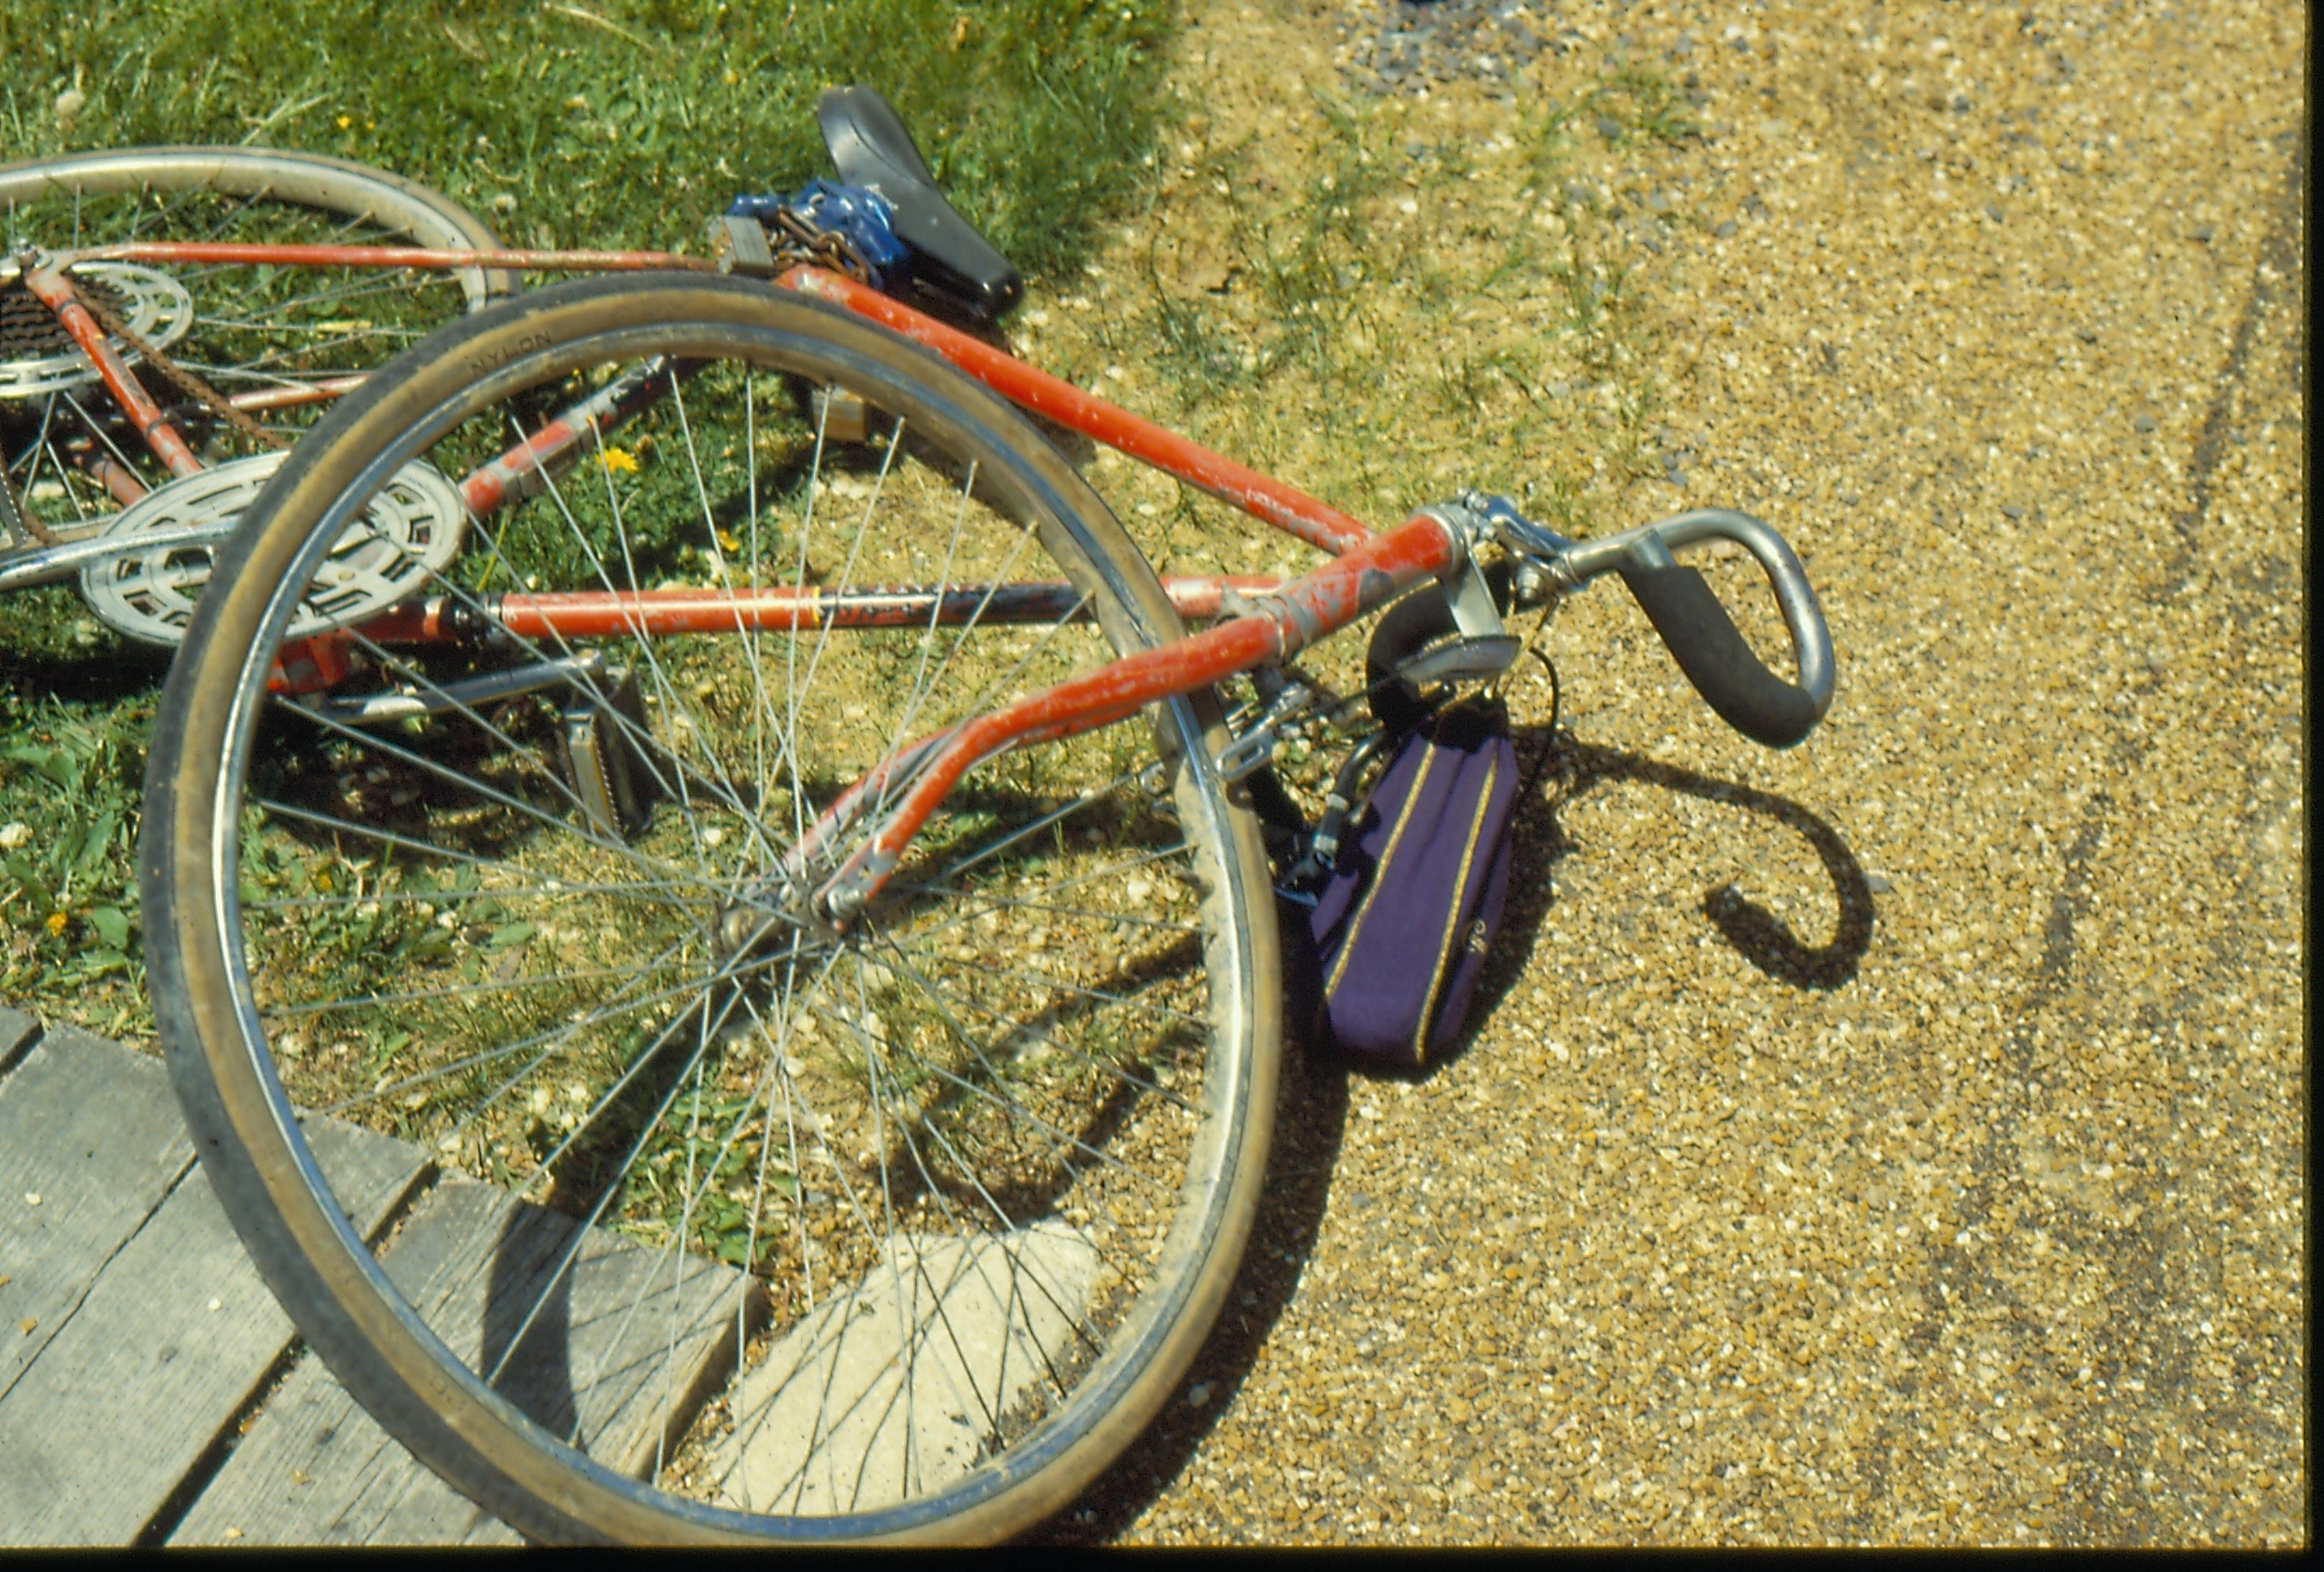 Bicycle Accident - Morse House - 1987 Law Enforcement, Accidents, Bicycle